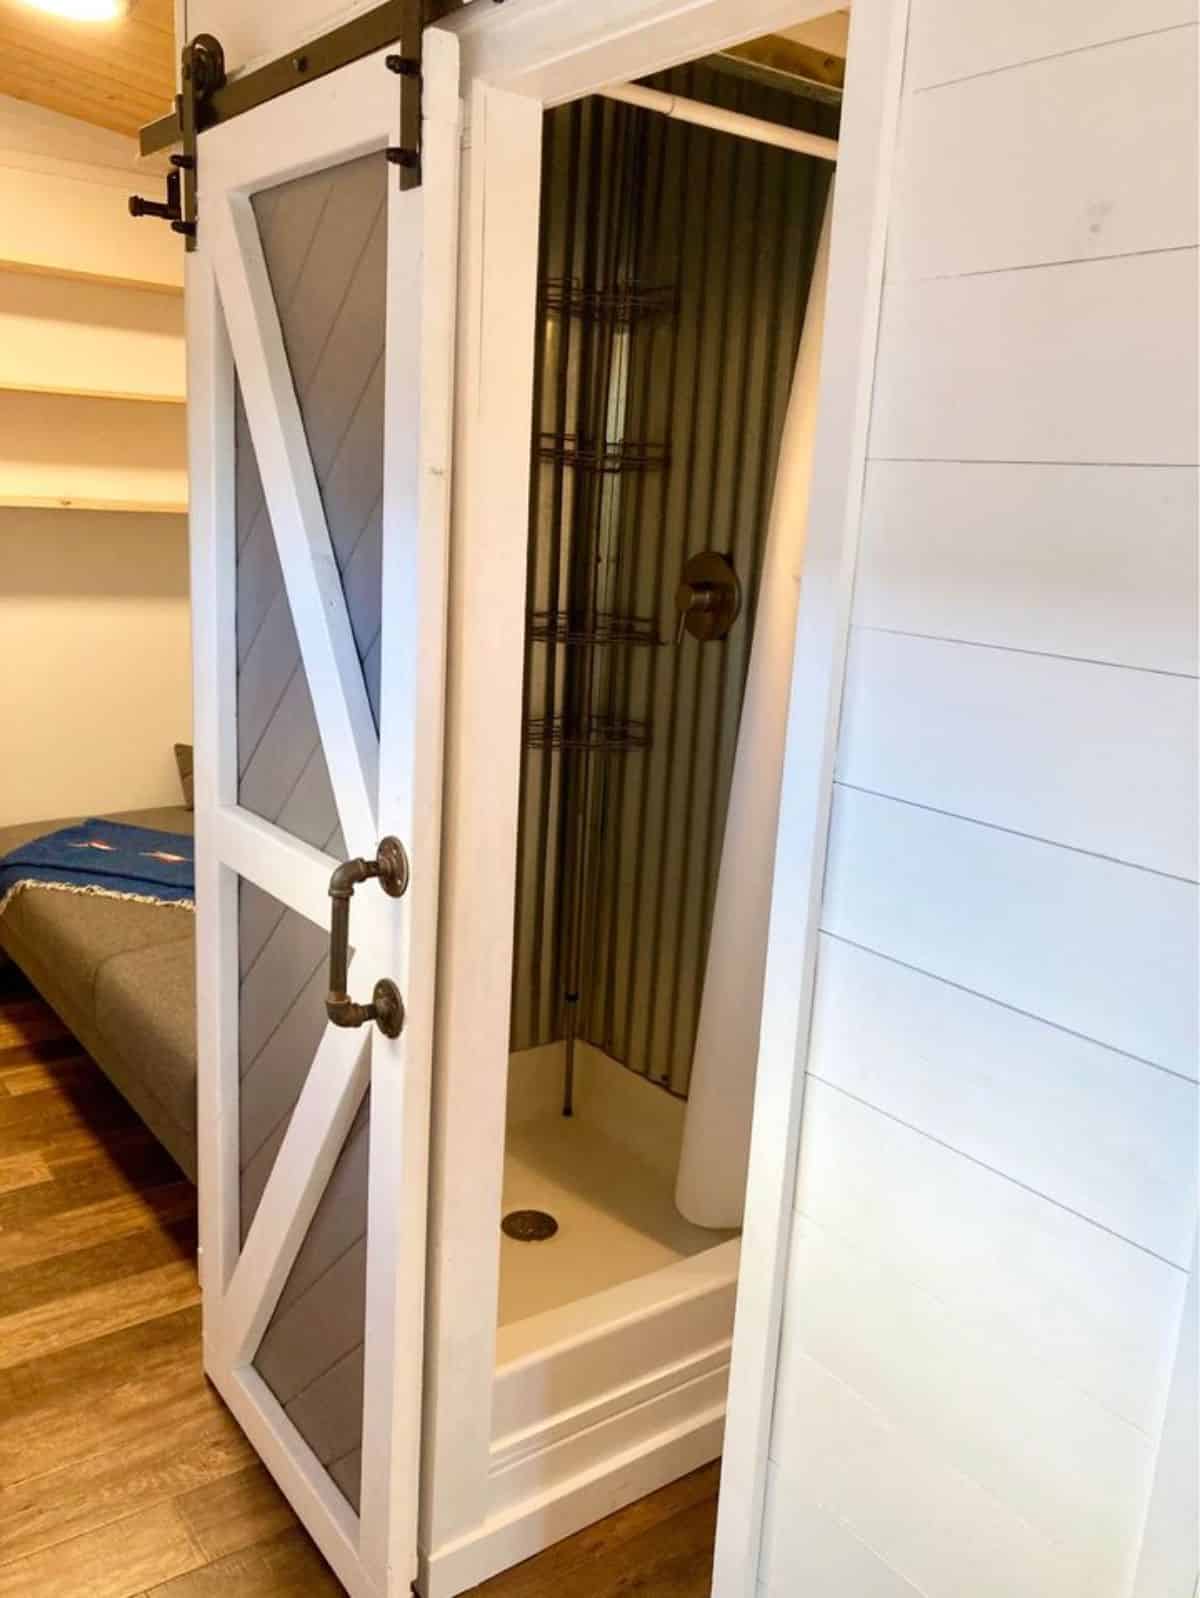 Separate shower area in bathroom of 25' Beautiful Tiny Home